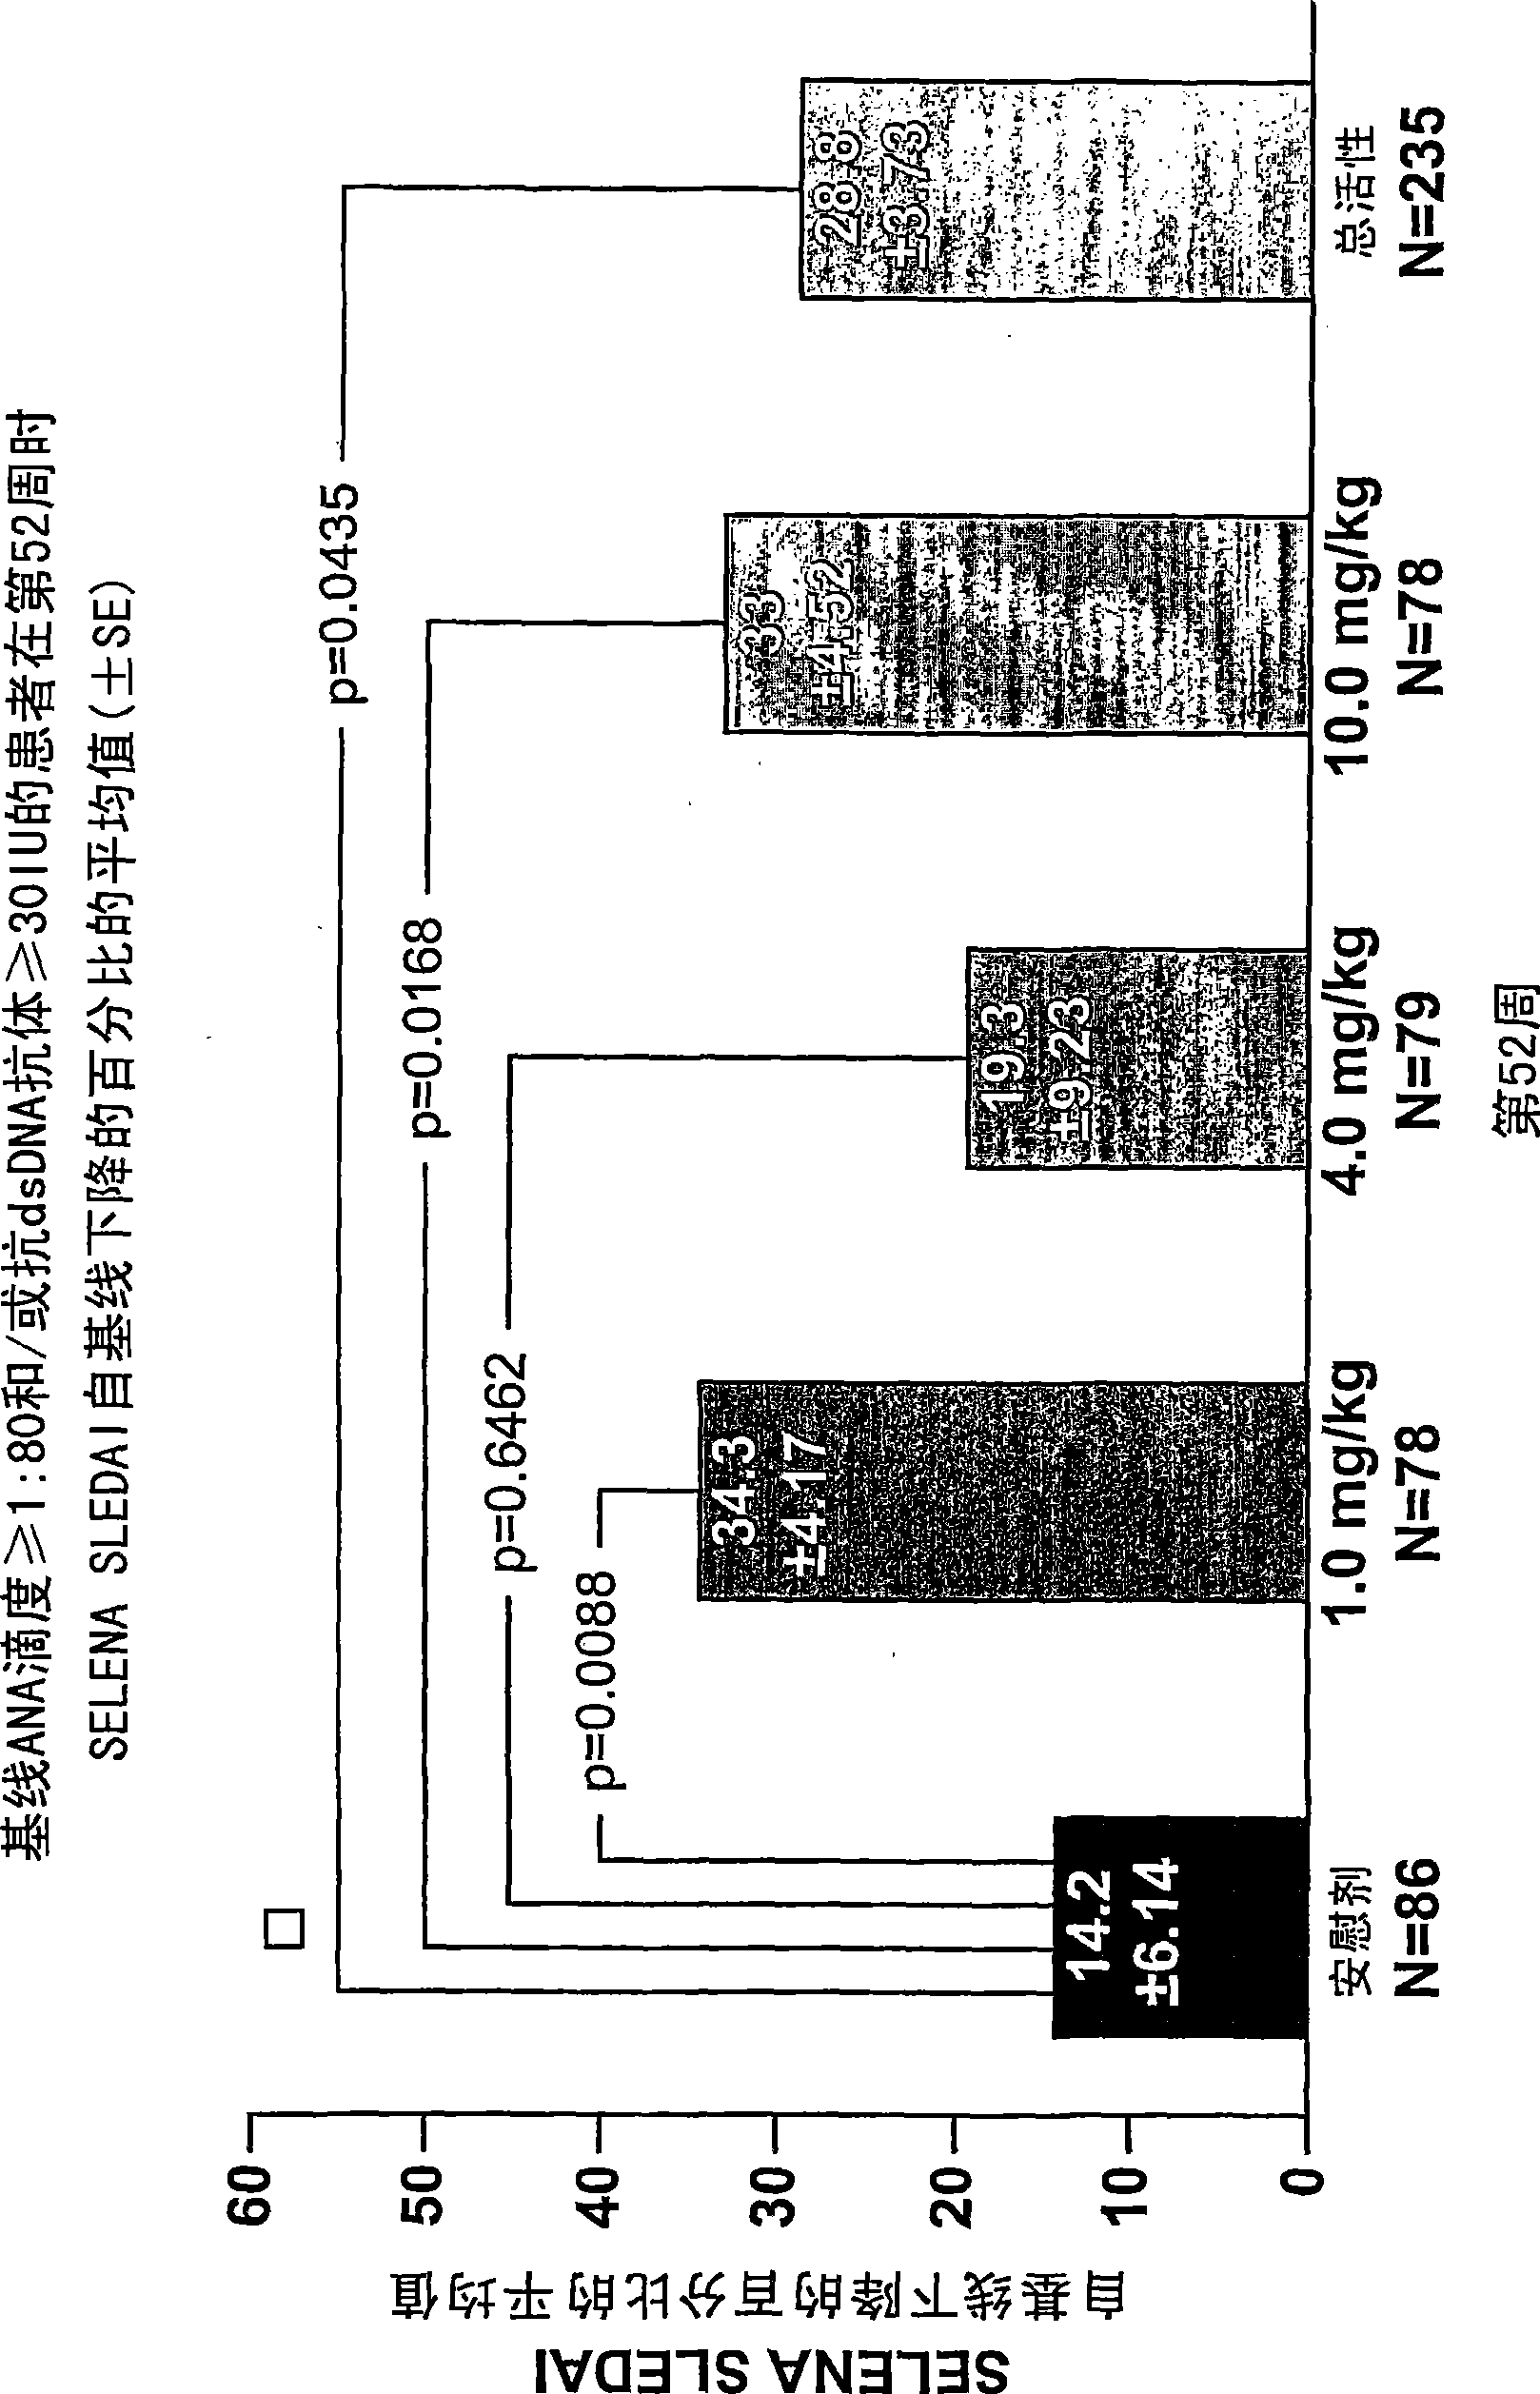 Methods and compositions for use in treatment of patients with autoantibody positive diseases